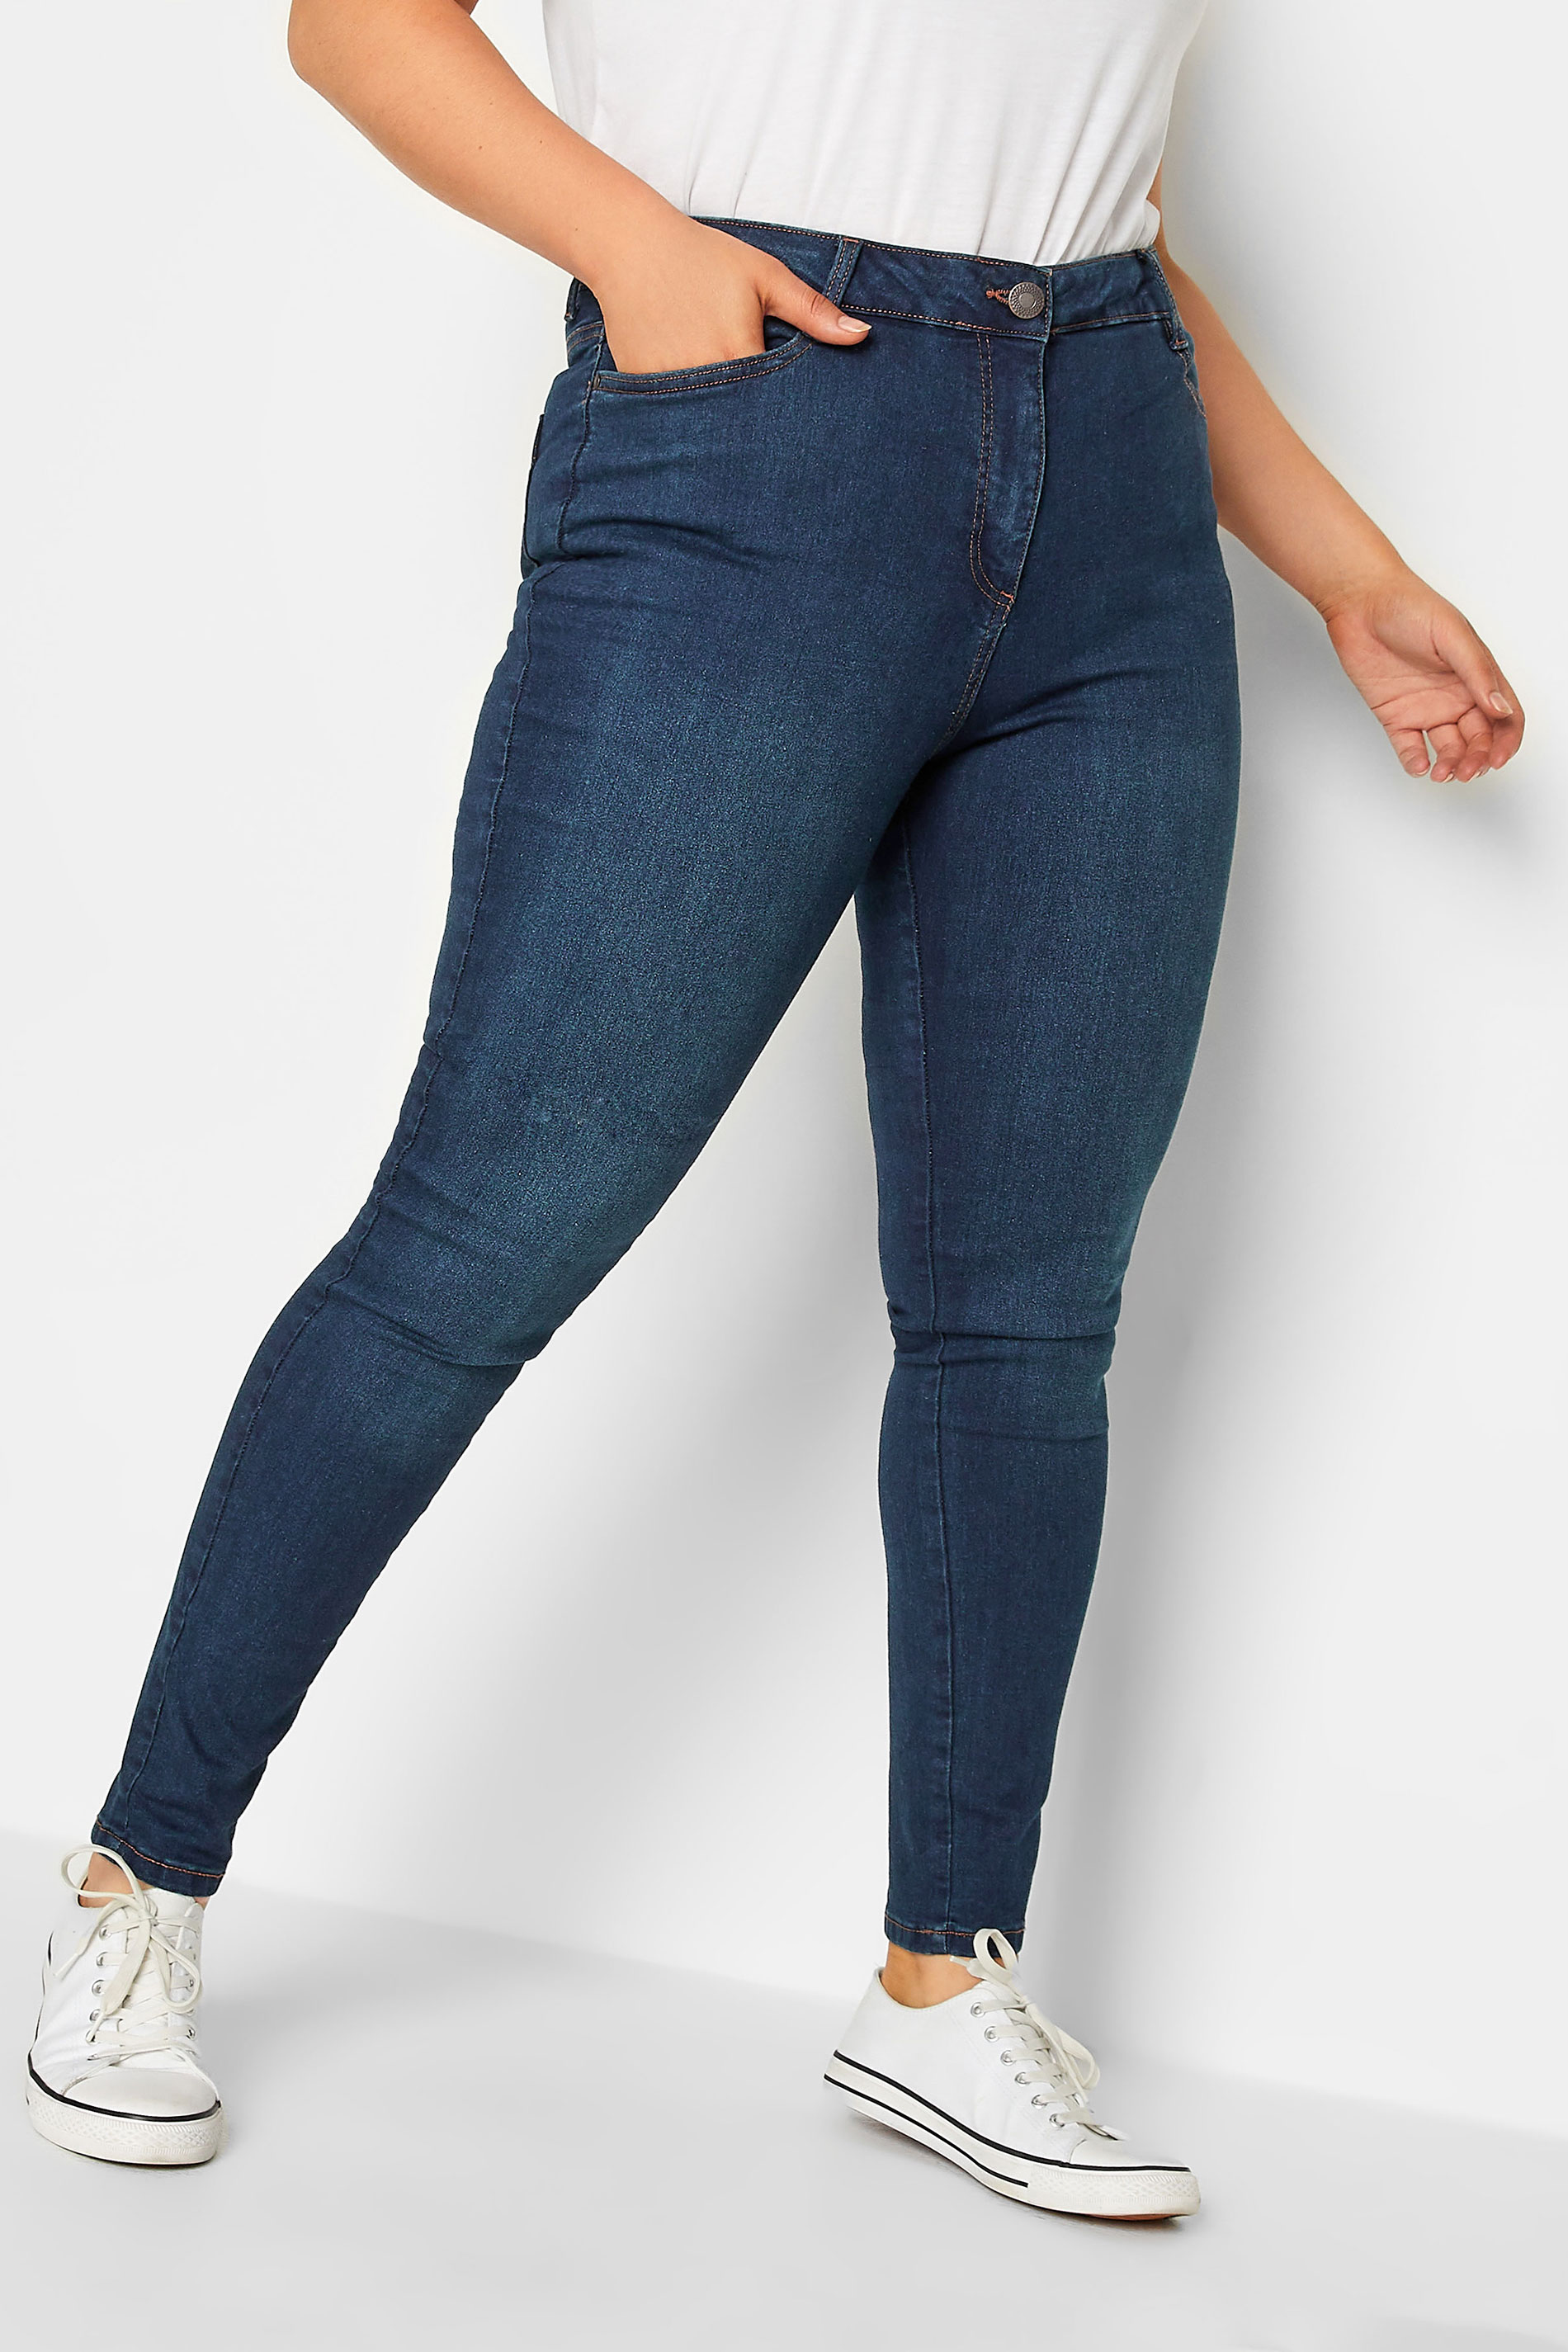 Plus Size Blue Elasticated Waist Ripped Skinny AVA Jeans